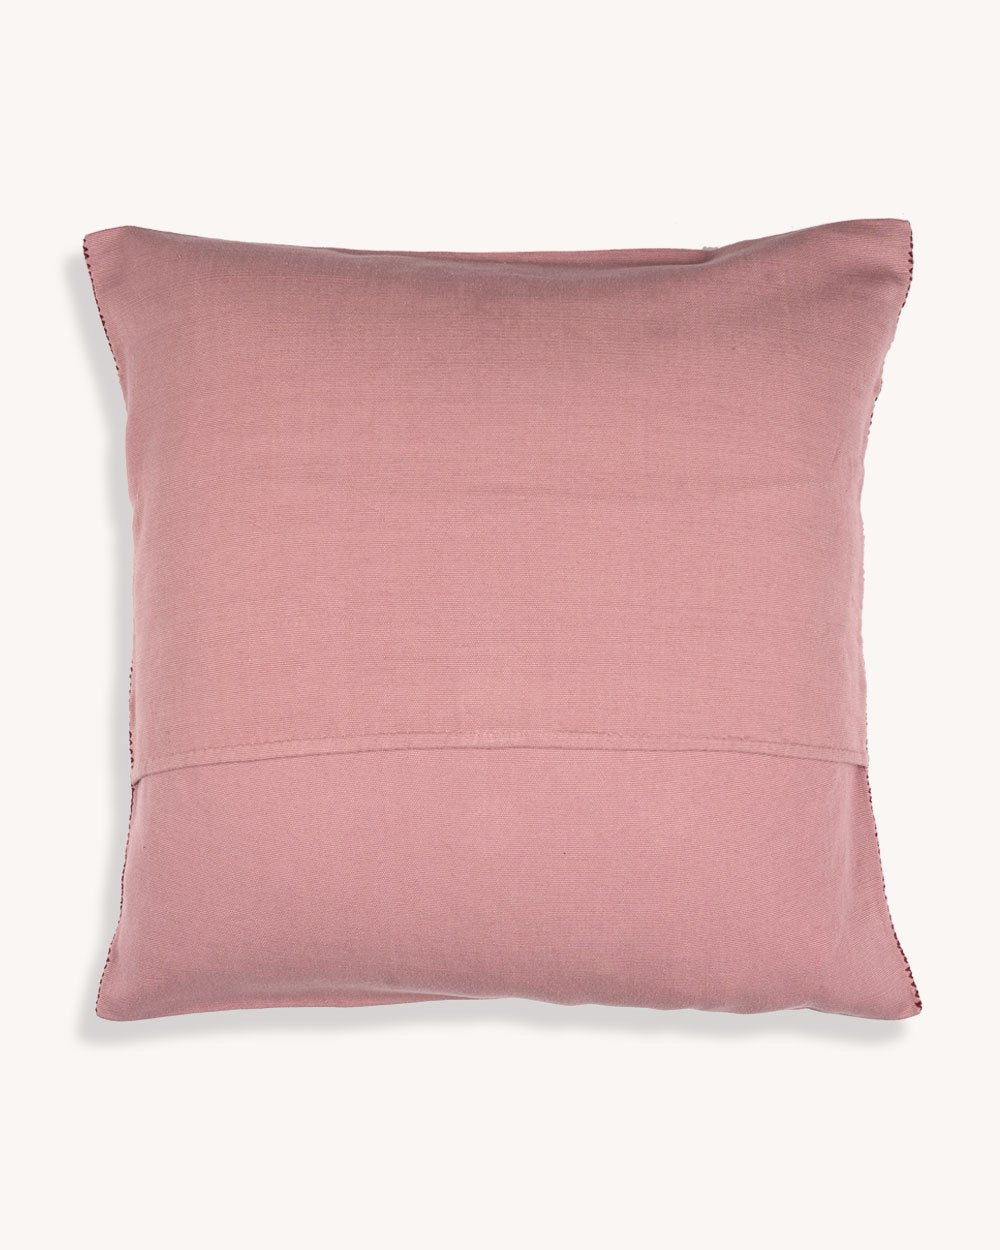 Routes-Path-of-the-sun-cushion-pink-back.jpg